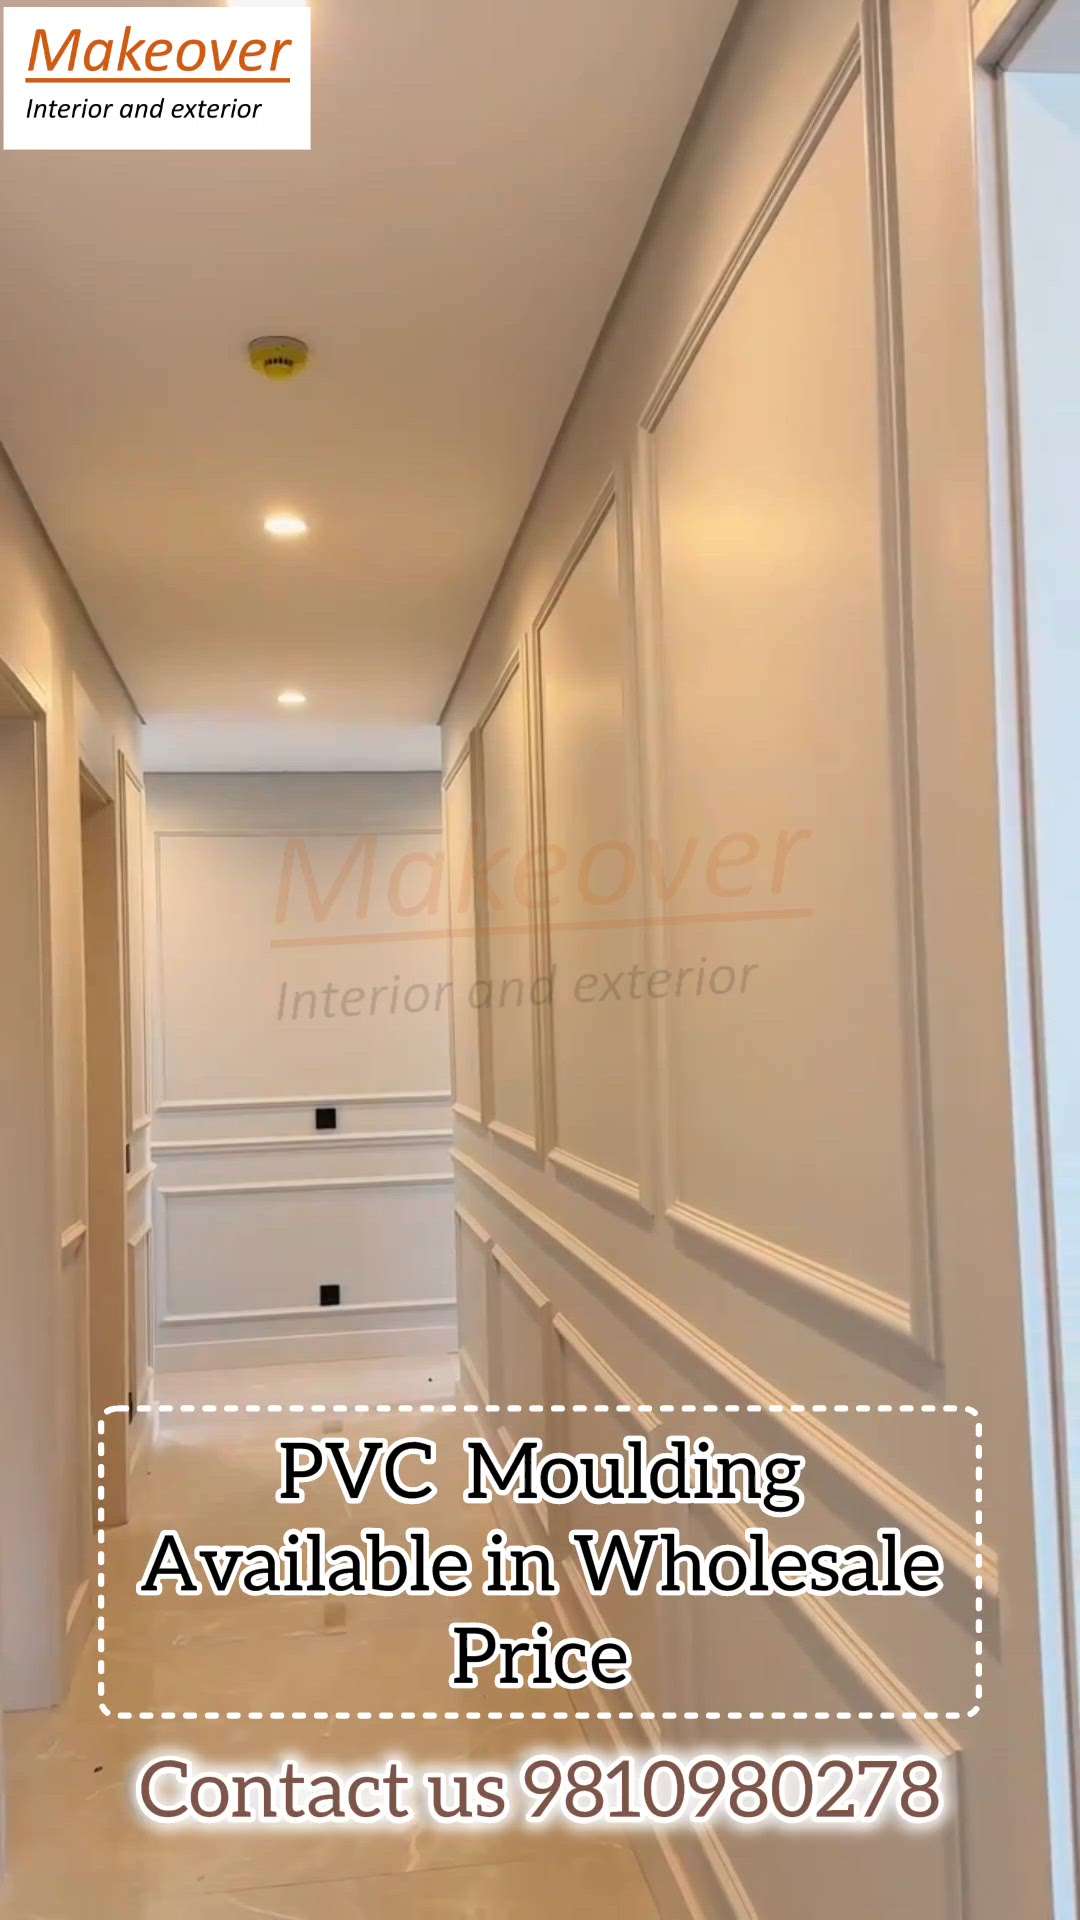 PVC Moulding available in wholesale price...any requirement now or in future please contact us 9810980278/9810980397